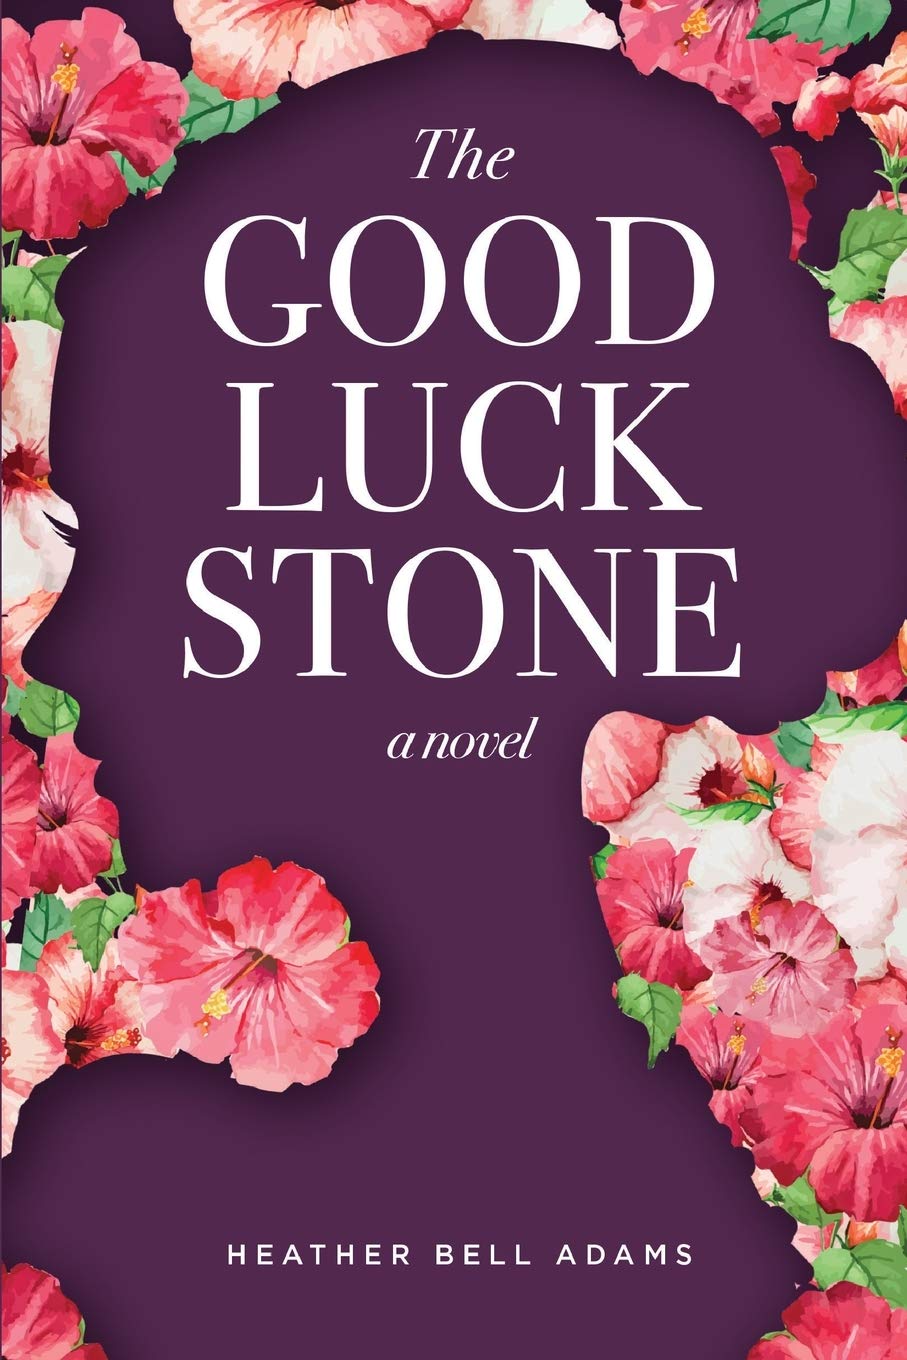 The Good Luck Stone